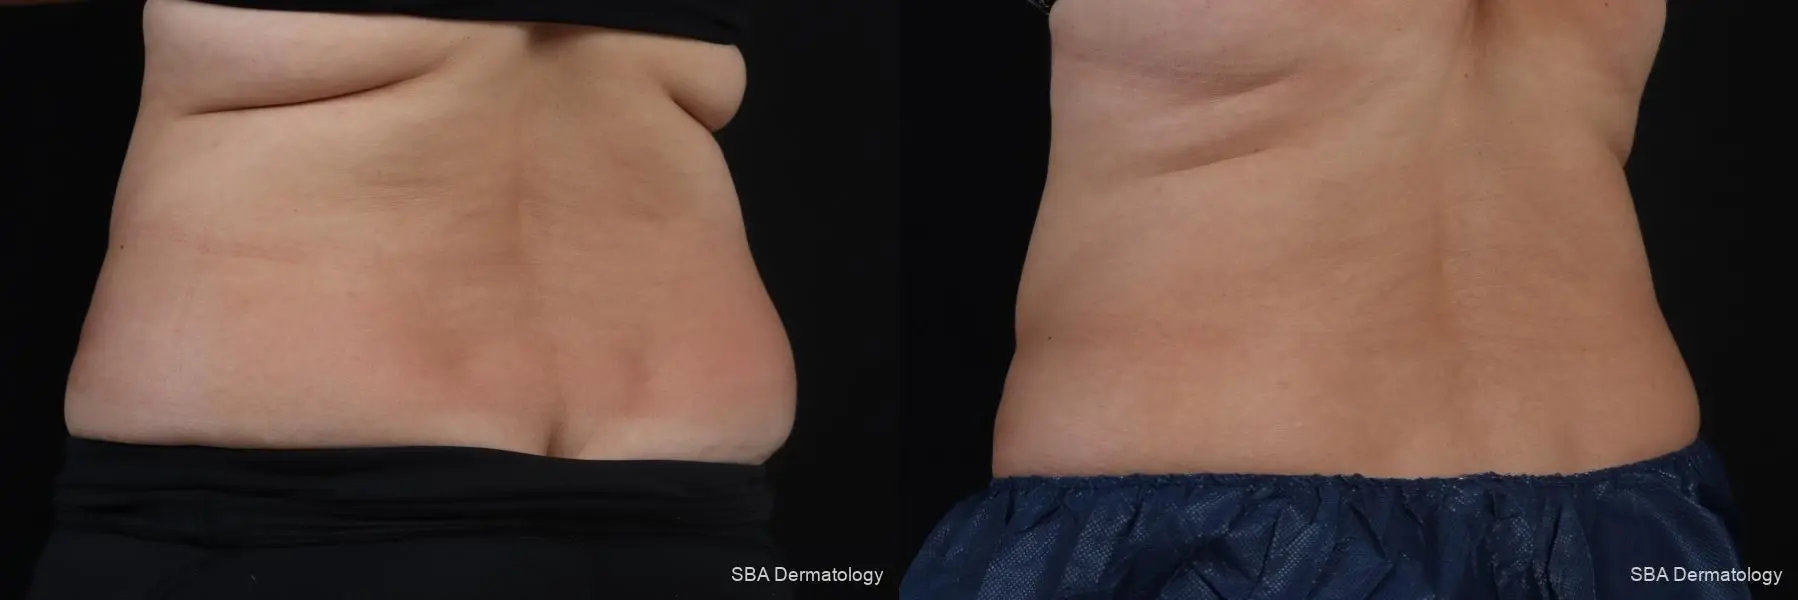 Coolsculpting: Patient 6 - Before and After 4